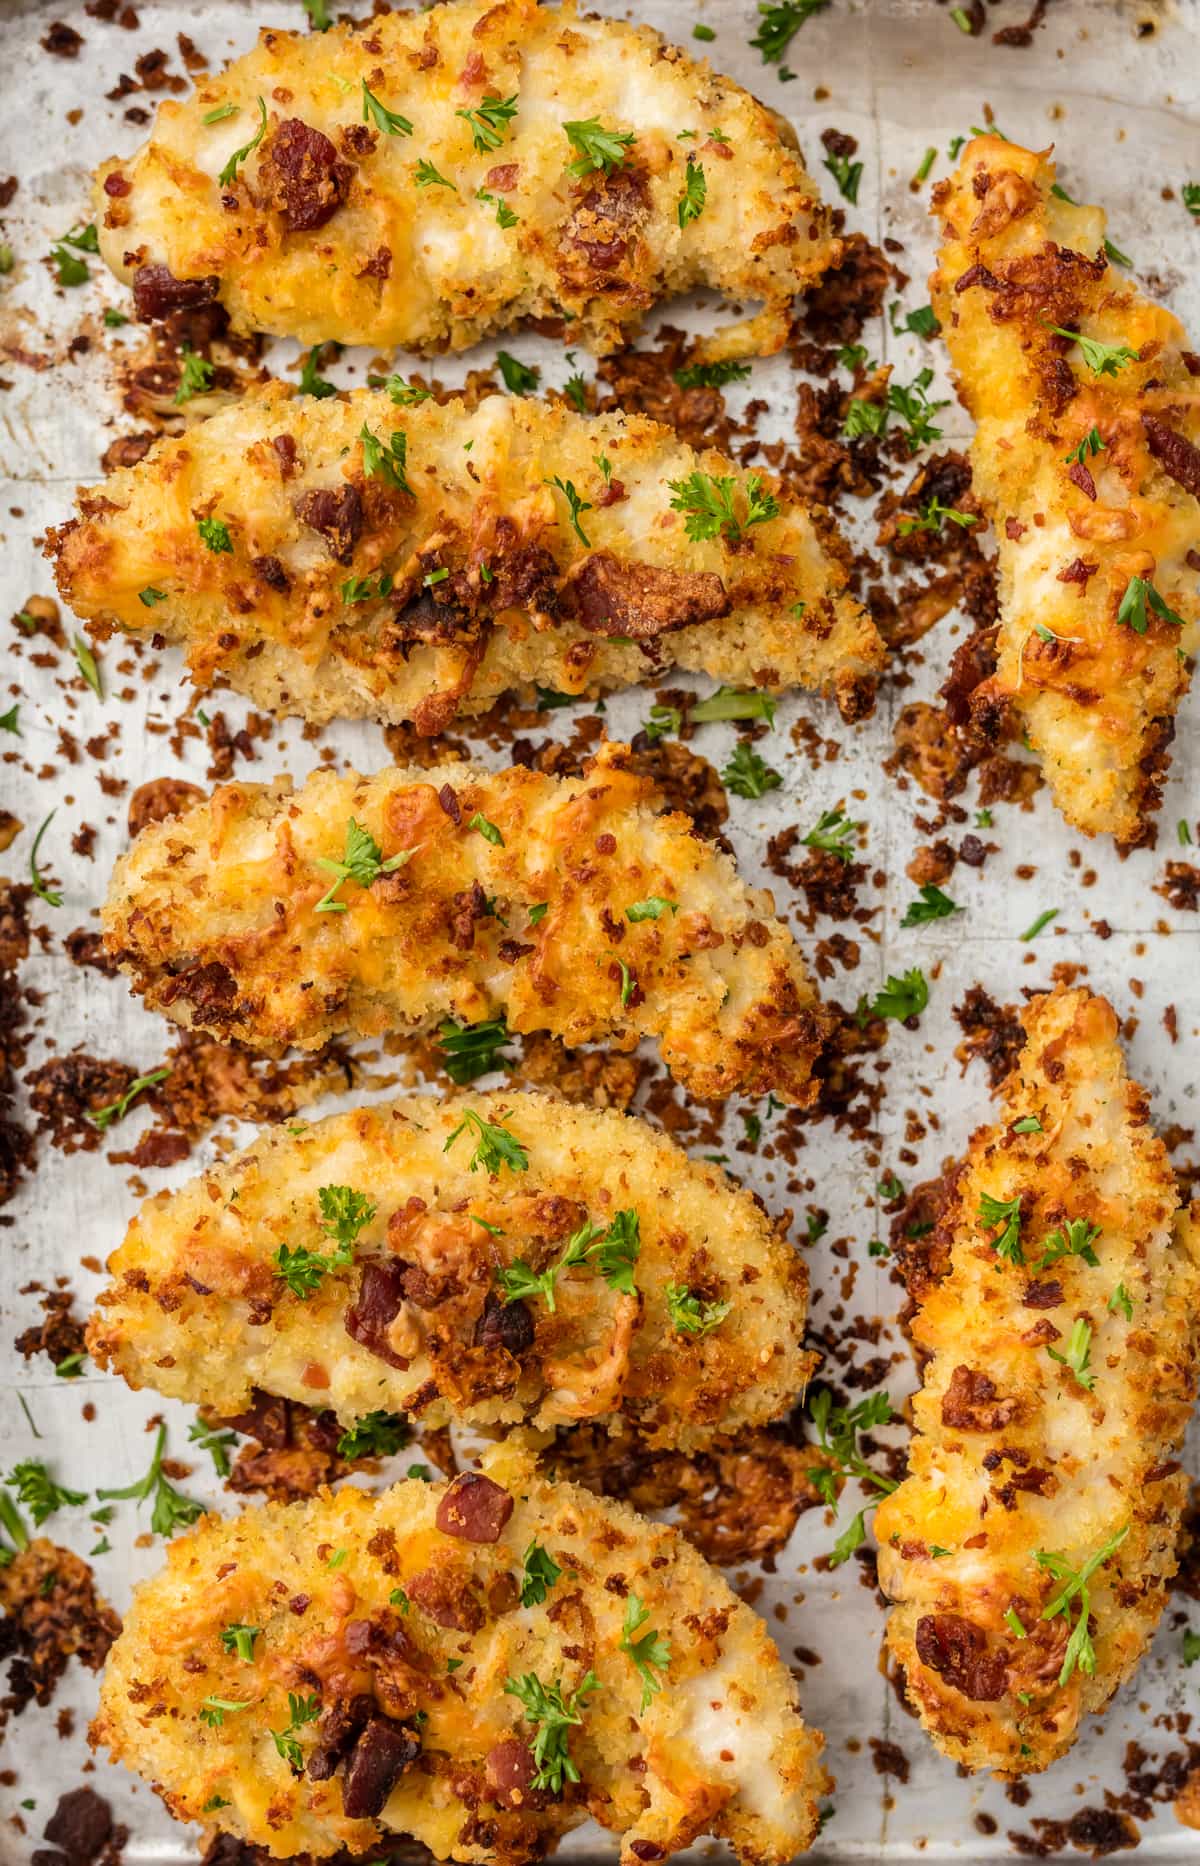 Oven Baked Chicken Tenders made with panko breadcrumbs, bacon, and ranch